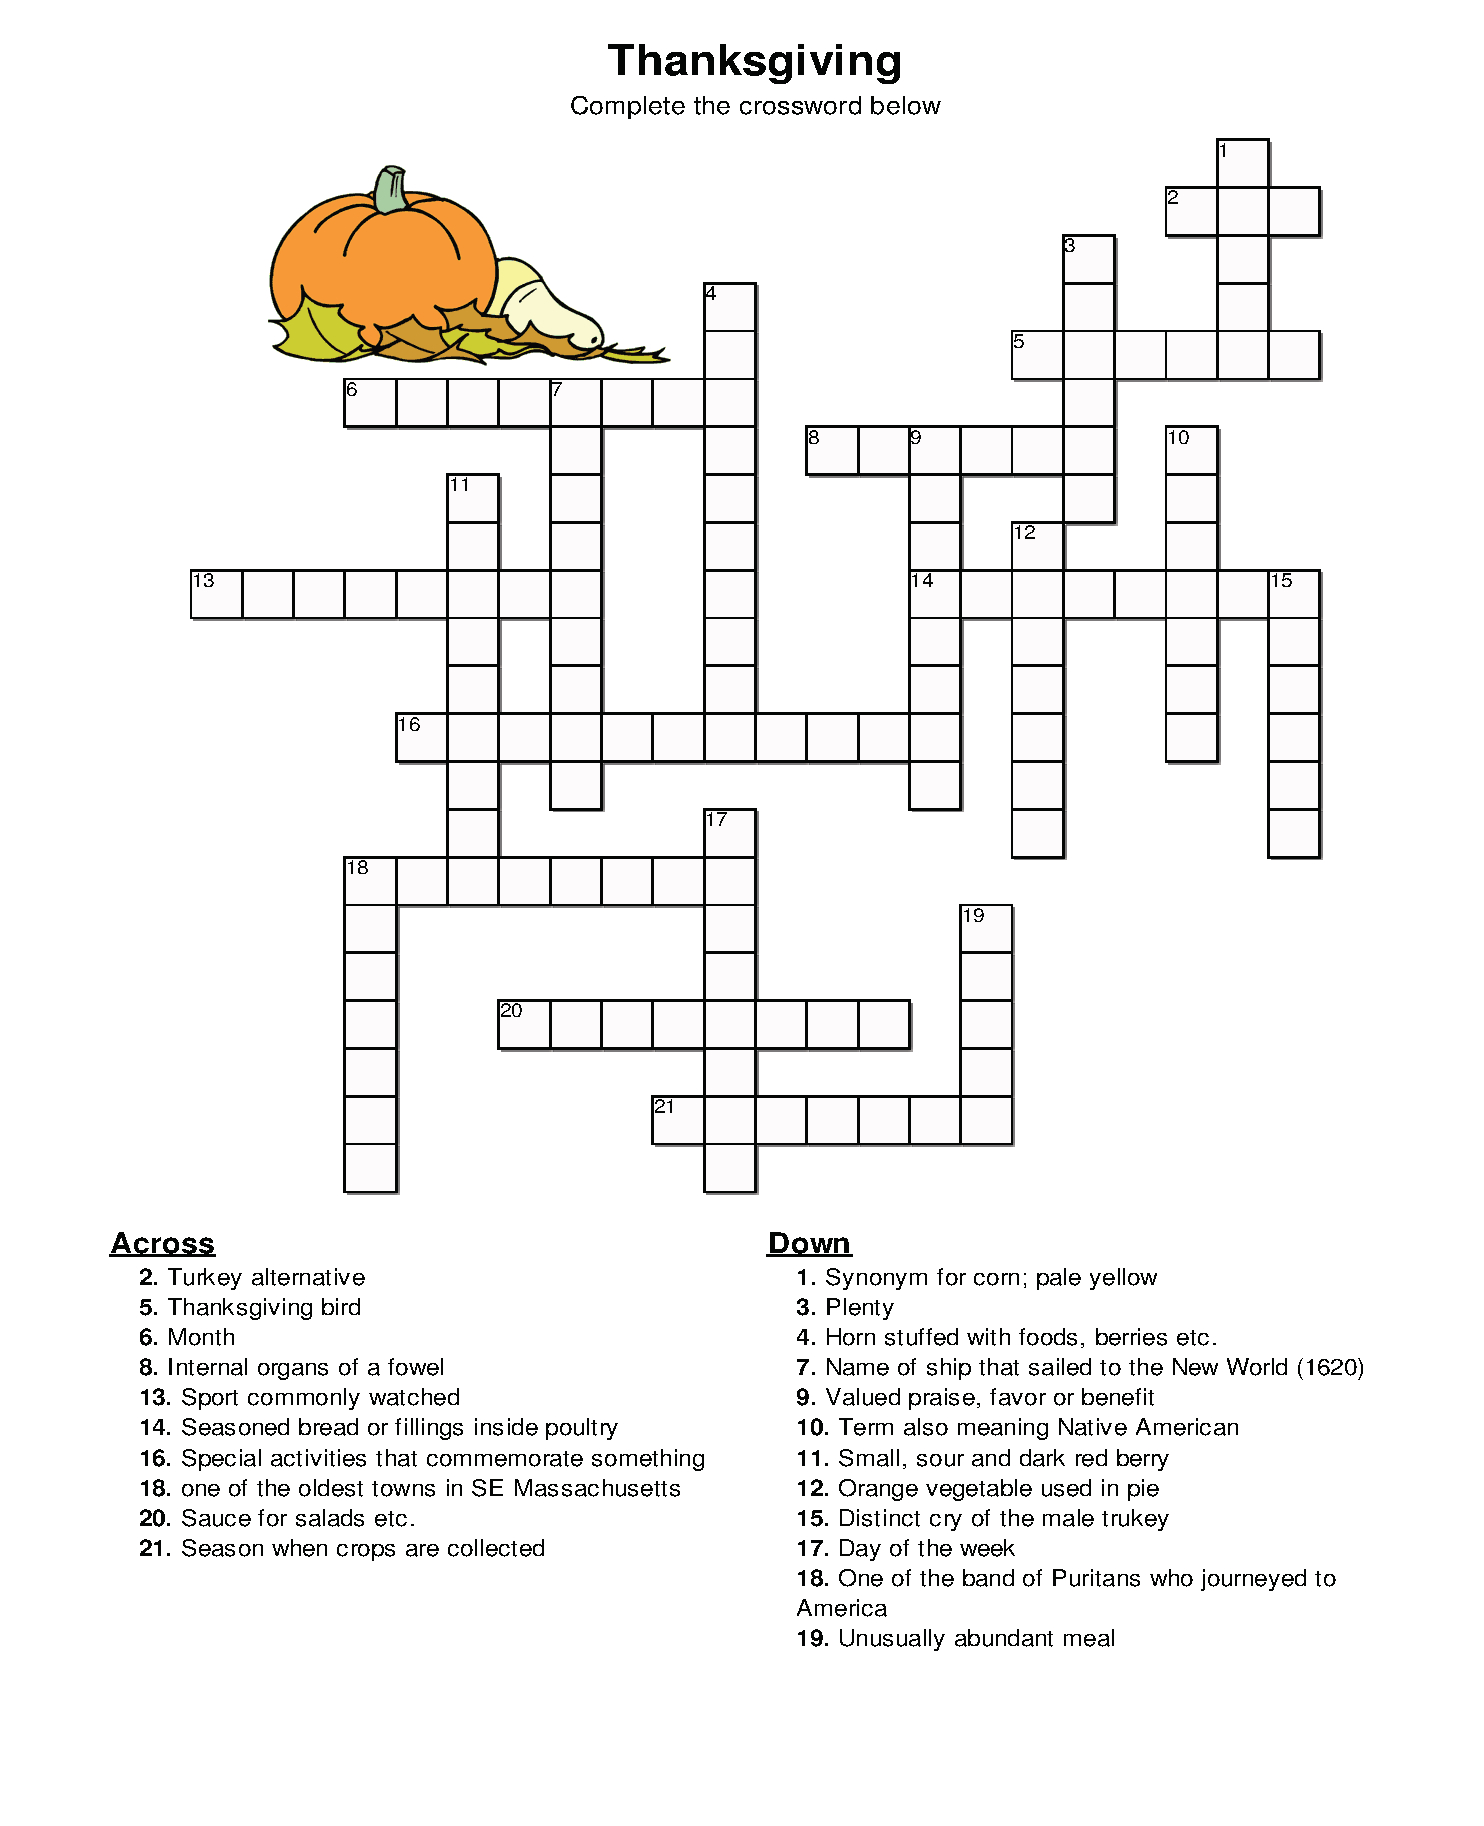 Thanksgiving Crossword Puzzle - Best Coloring Pages For Kids - Thanksgiving Crossword Puzzle Printable